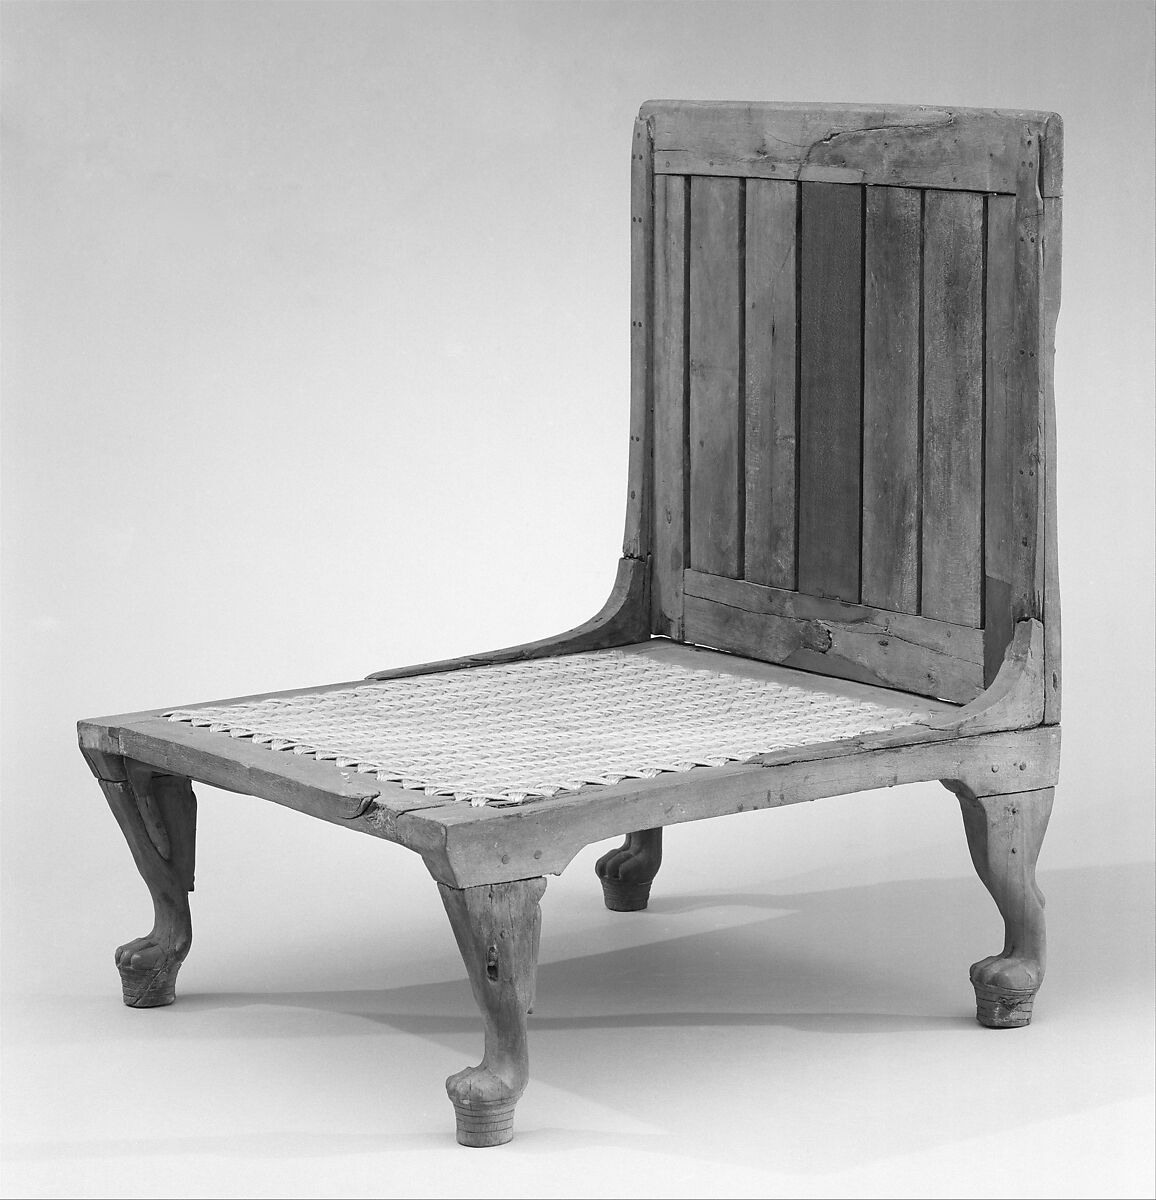 Chair for a Woman, Wood (tamarisk), reed